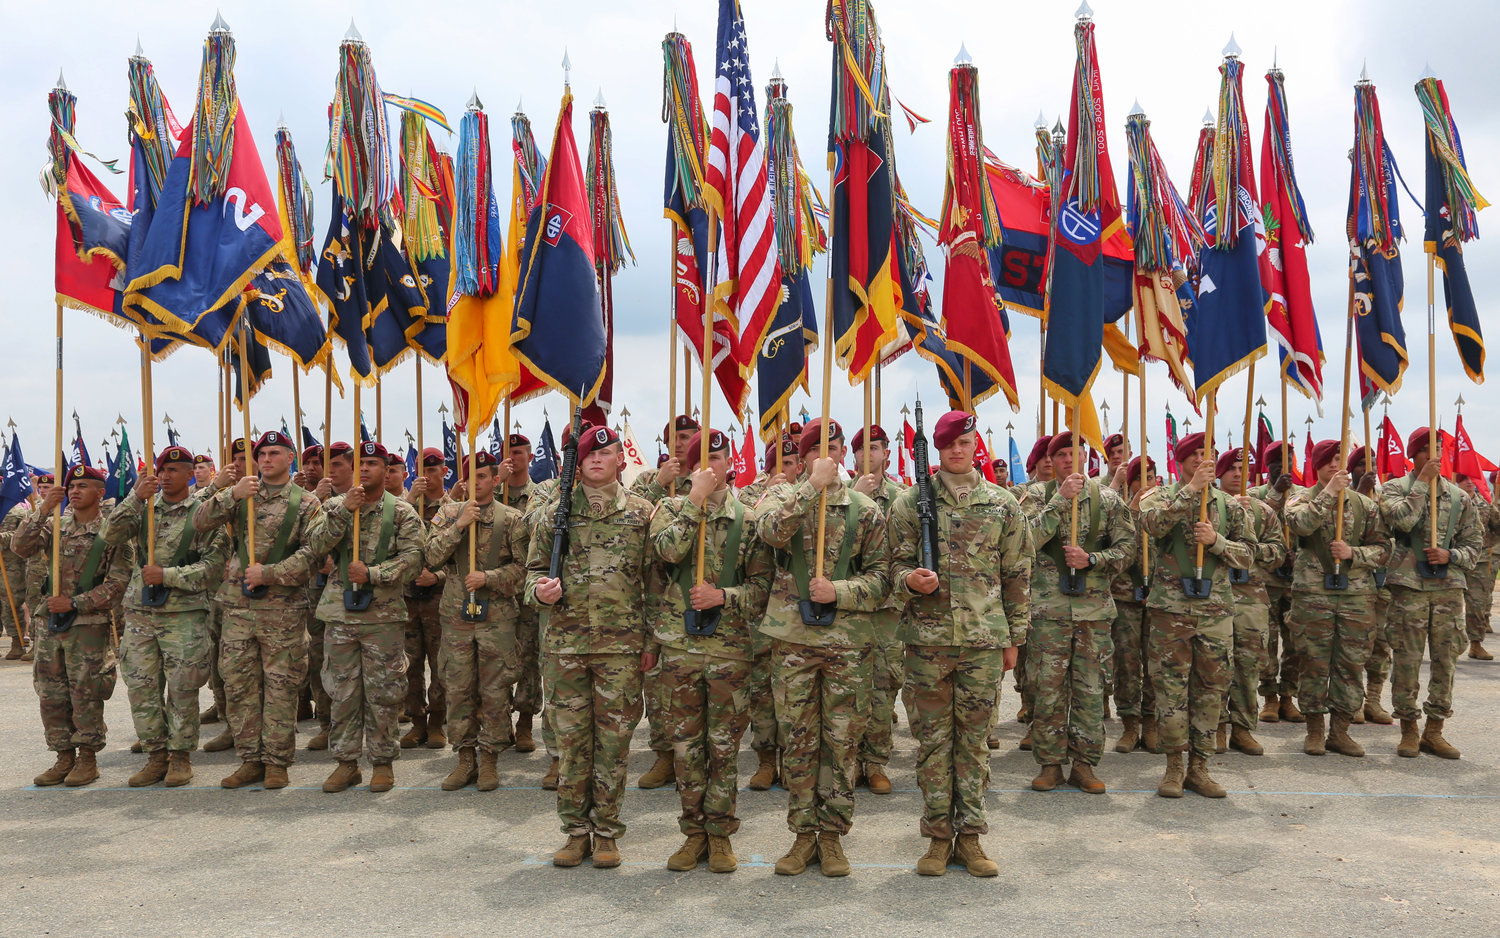 Paratroopers throughout the 82nd Airborne Divison participate in the Airborne Review during All American week in May 2018 at Fort Bragg. Paratroopers past and present converged on Fort Bragg to celebrate being members of the All American Division and America’s Guard of Honor. (U.S. Army photo by Spc. Jada Owens)